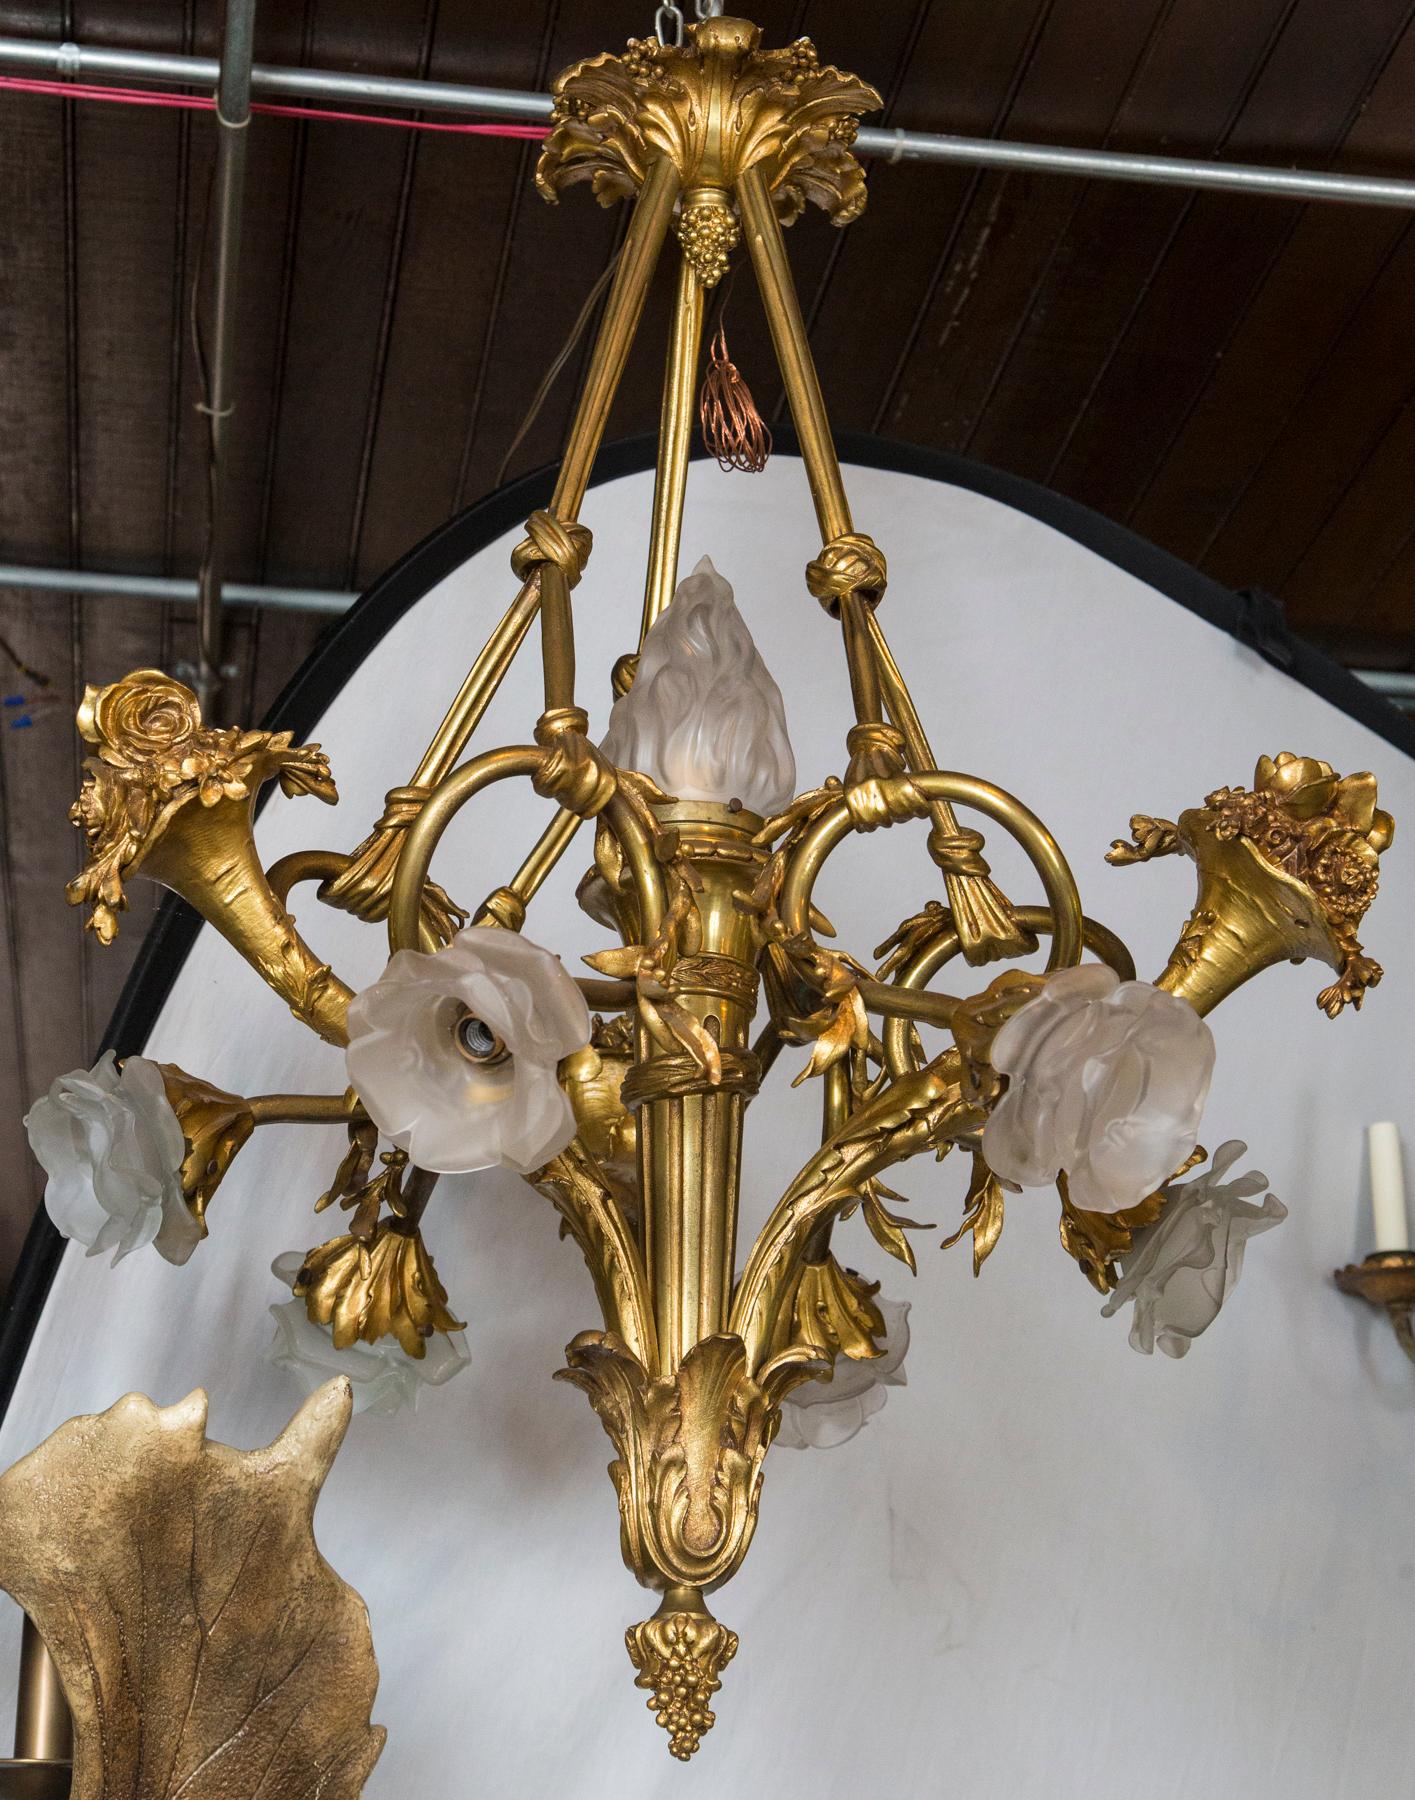 The central torch form topped by a frosted glass flame shade. Six other frosted glass floral form shades turn downward. Acanthus leaf for candle cups, with acanthus form decoration on the lower part, the arms, and the ceiling cap. A grape form